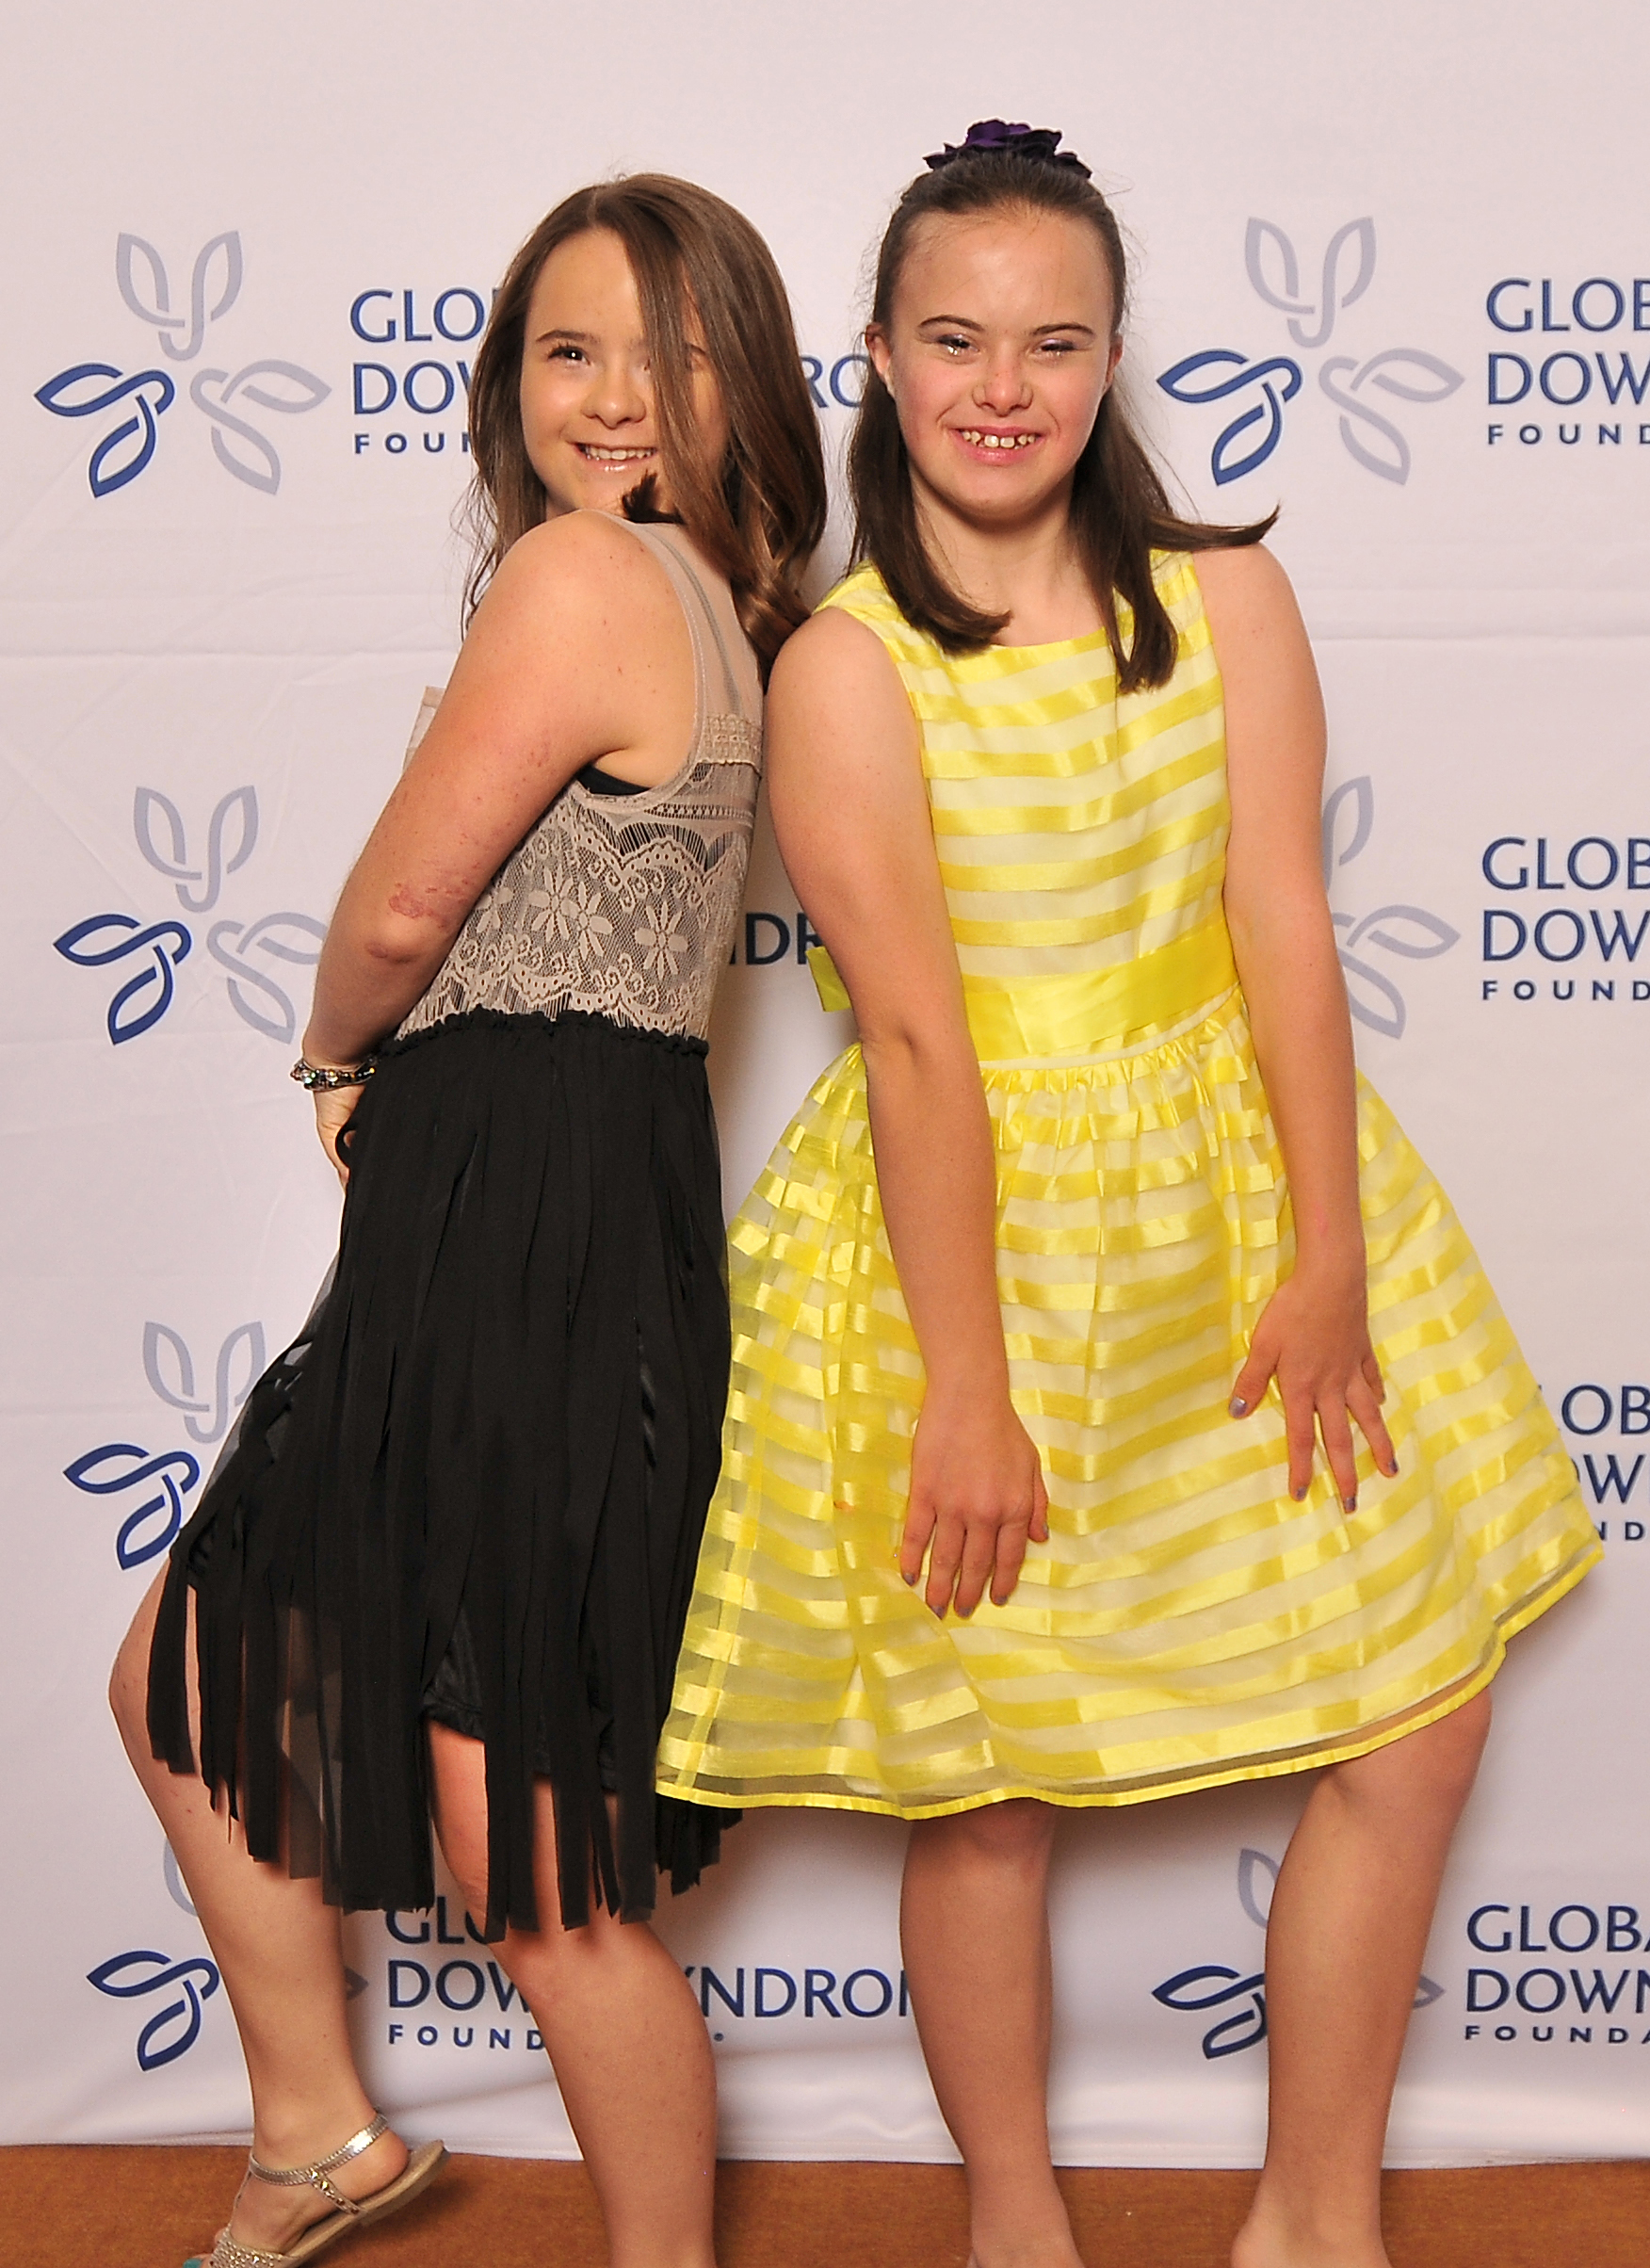 Global Down Syndrome Foundation launches Be Beautiful Be Yourself Hollywood Ball